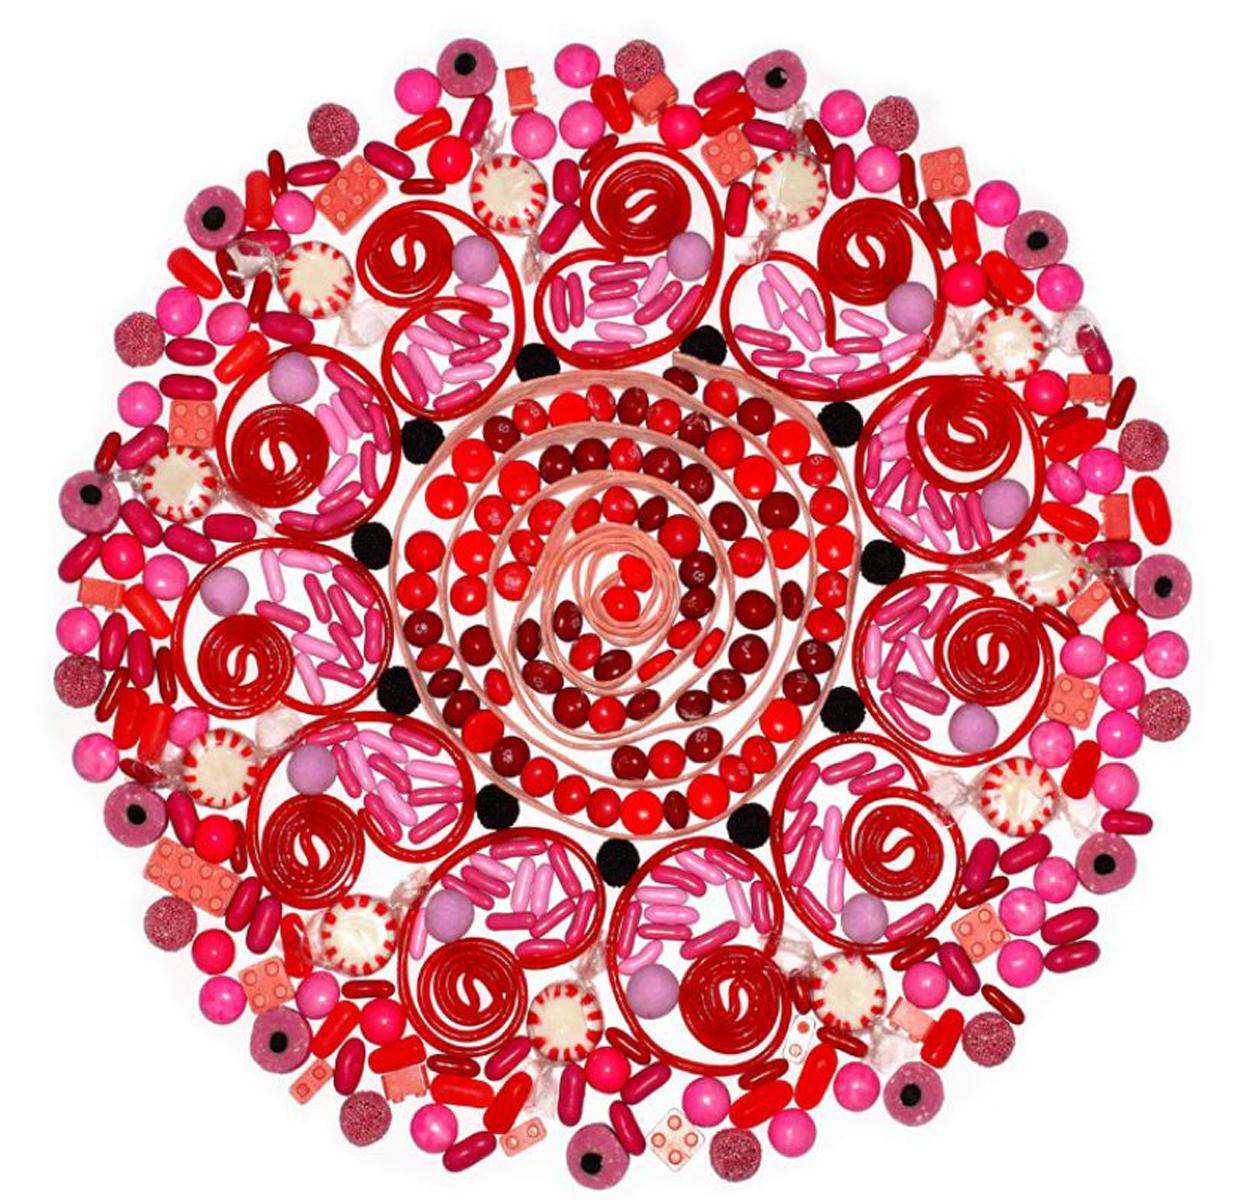 Paula Brett Color Photograph - Ring Around the Rosey, Candy, Sweets, Limited Edition Photograph, framed, Hearts